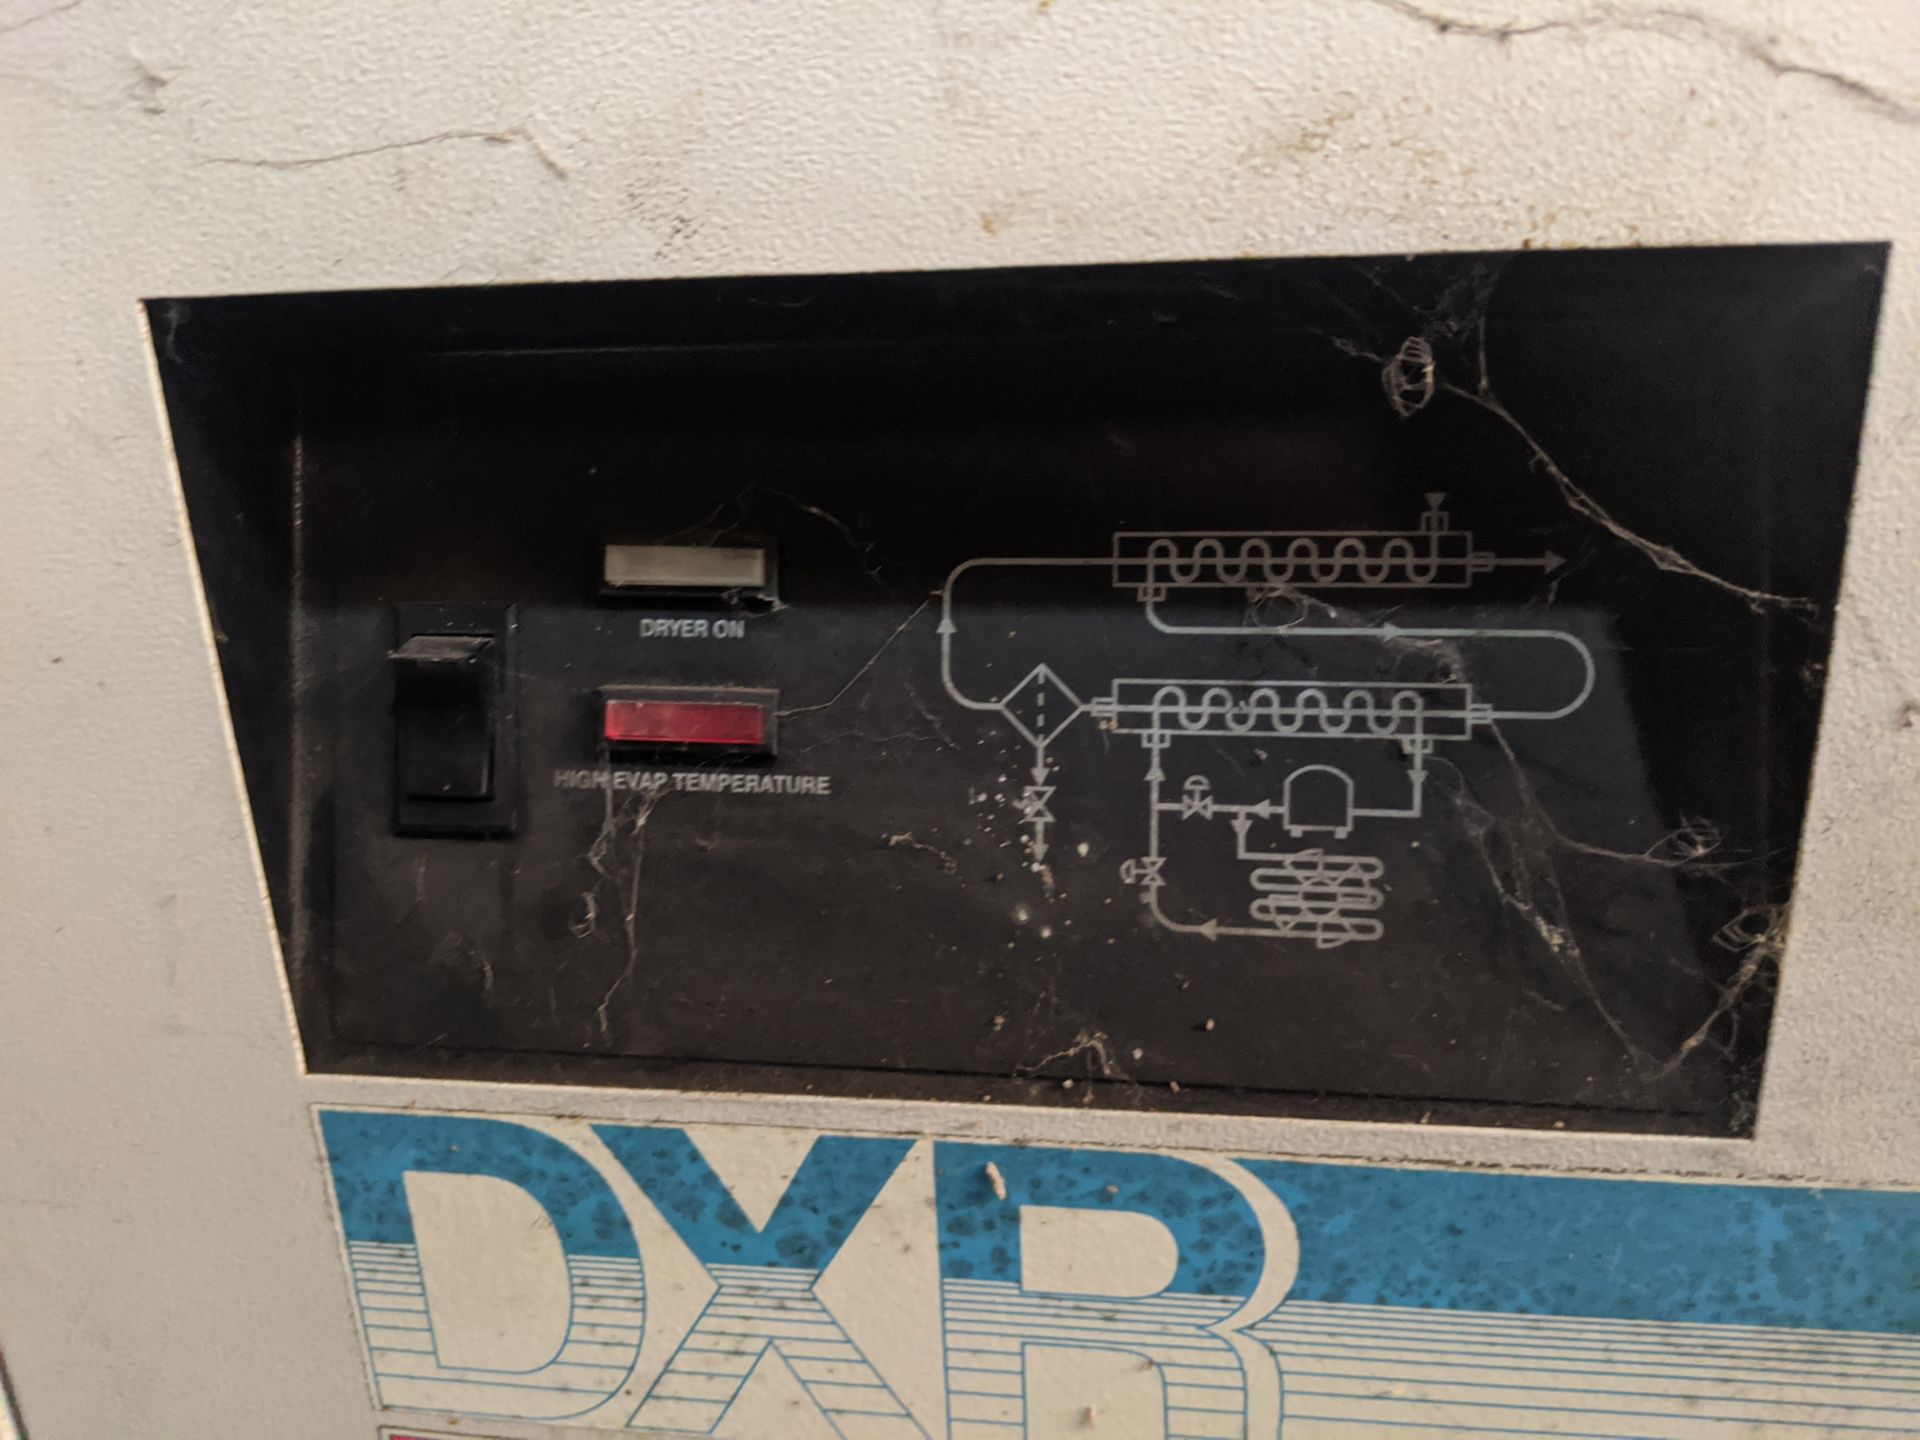 1996 Ingersoll-Rand Model DXR100 Refrigerated Air Dryer - Image 2 of 4